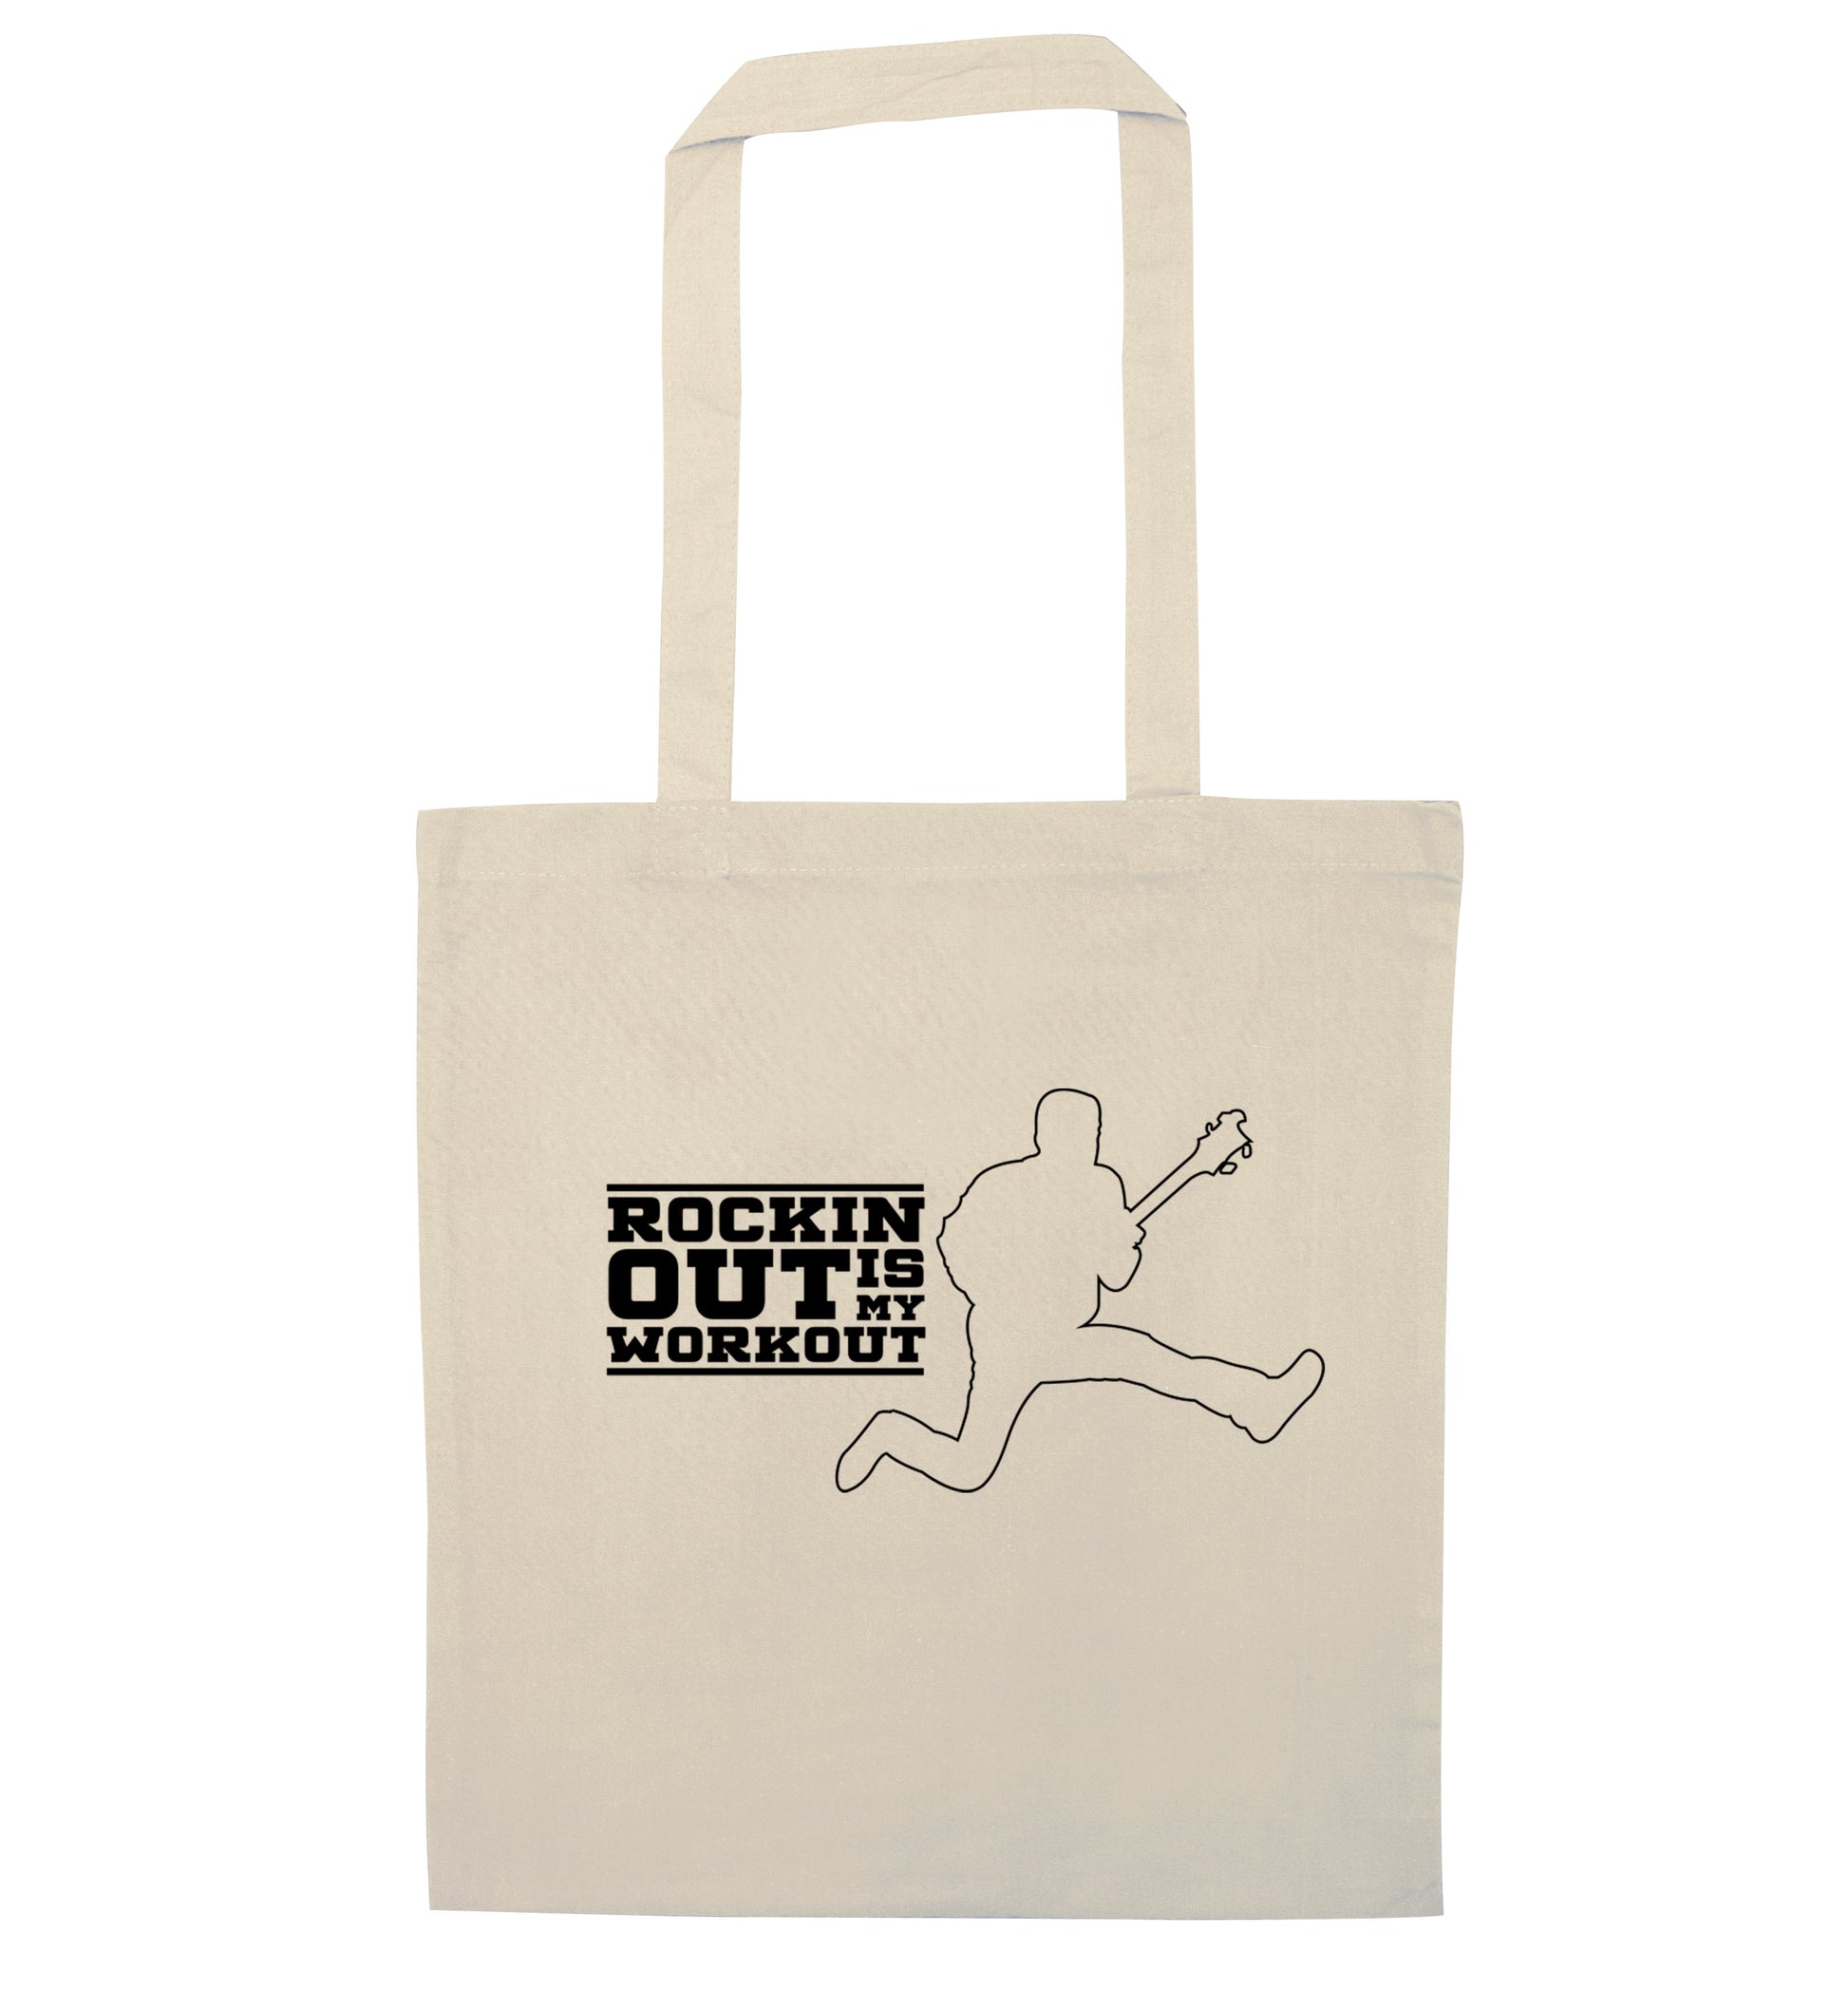 Rockin out is my workout natural tote bag